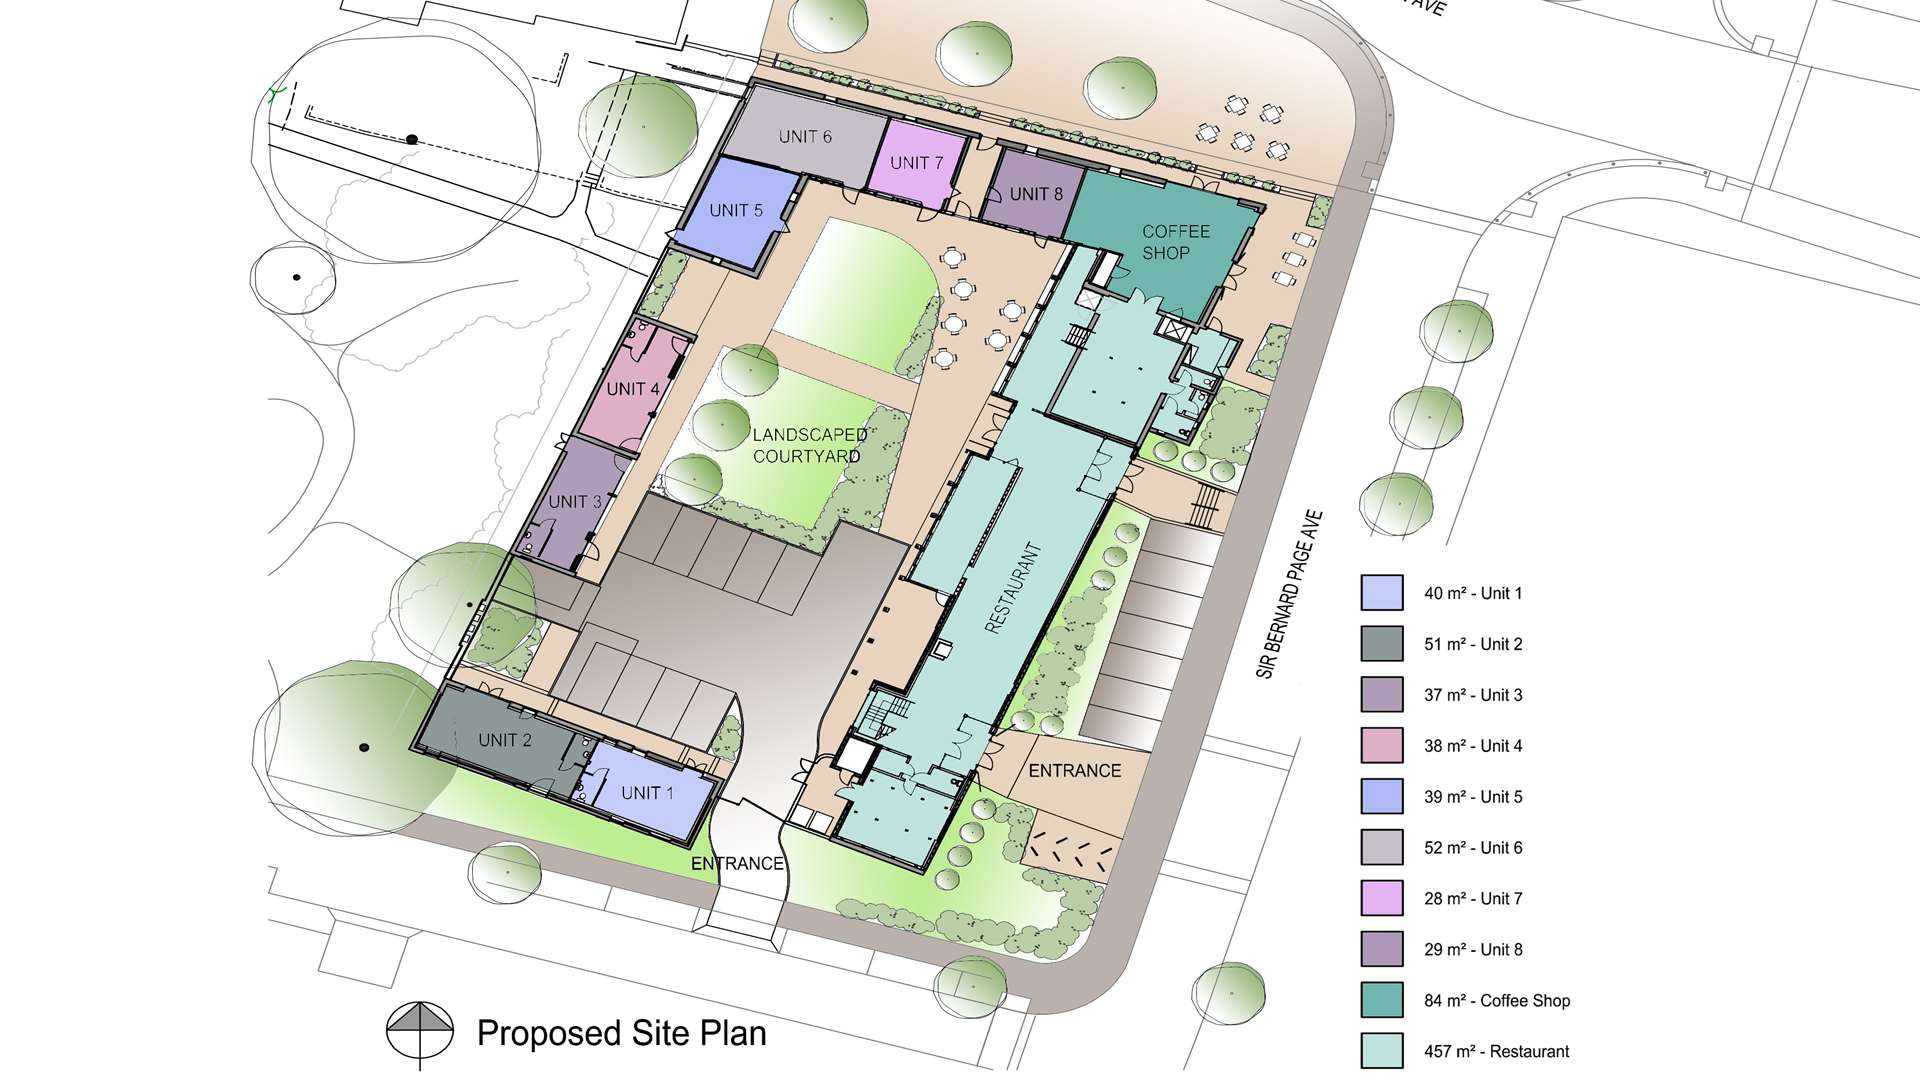 The proposed site plan